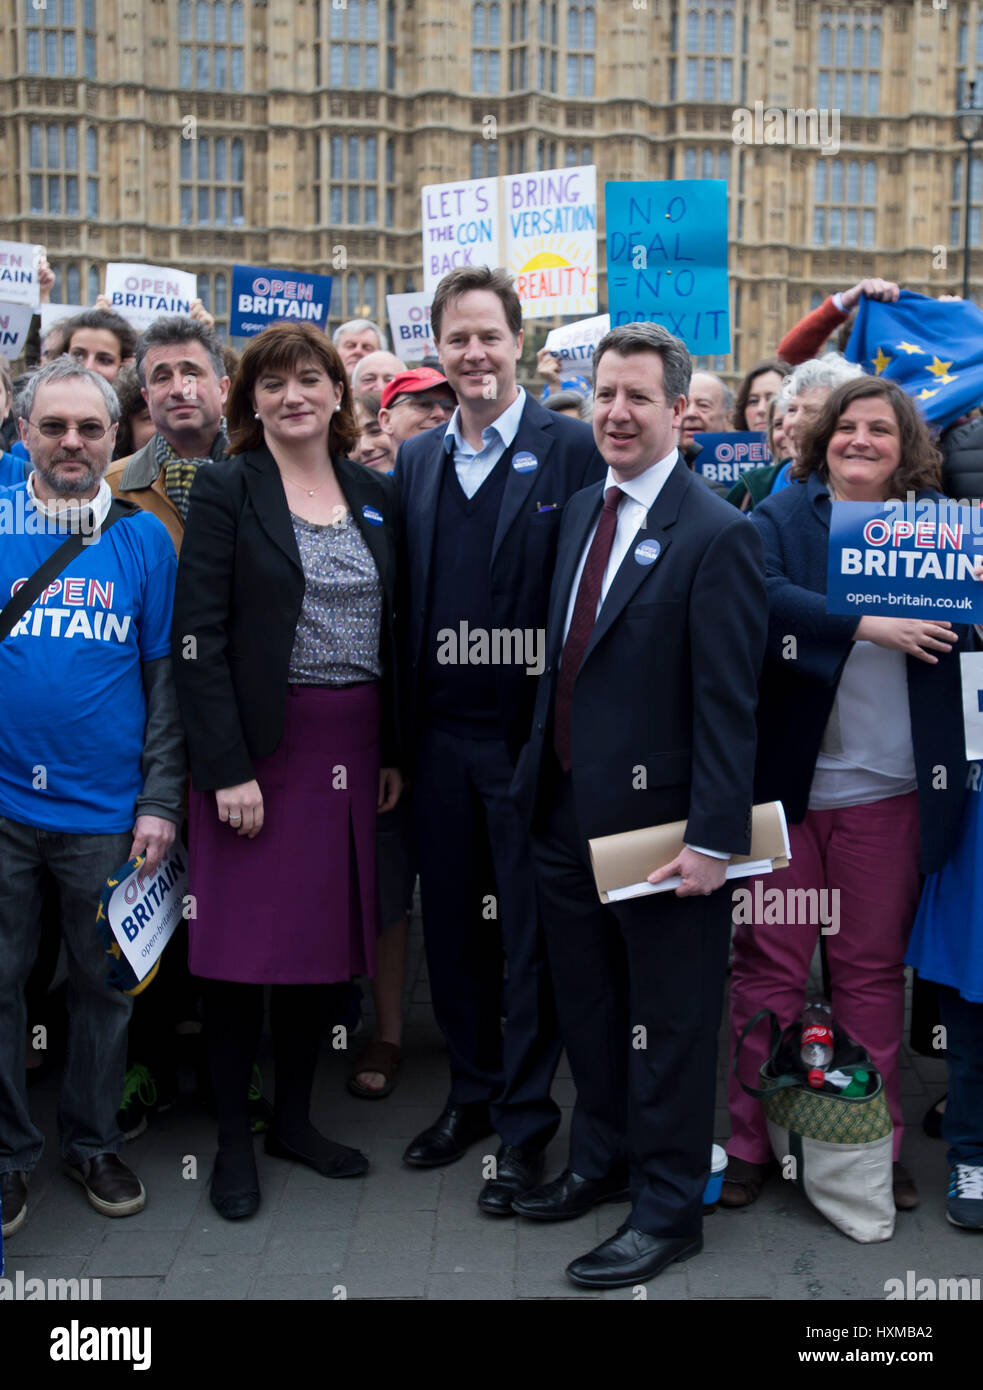 (left to right) MPs Nicky Morgan, Nick Clegg and Chris Leslie join members of Open Britain, which campaigns for a soft Brexit in Parliament Square, London after the Prime Minister Theresa May signed a letter to trigger Article 50 that starts the formal exit process by the UK from the European Union. Stock Photo